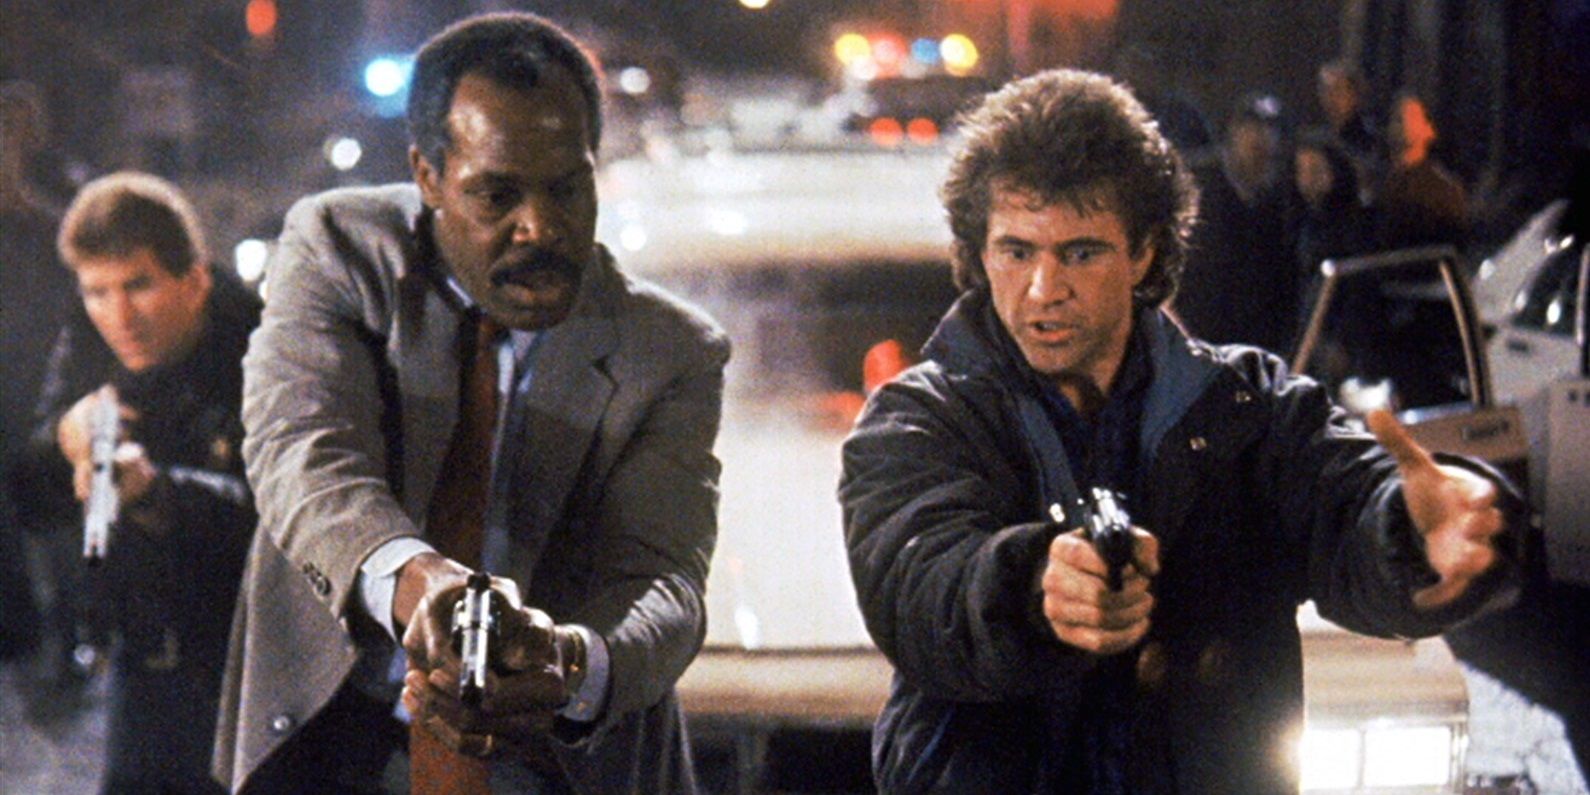 Riggs and Murtaugh with their guns drawn in Lethal Weapon 2